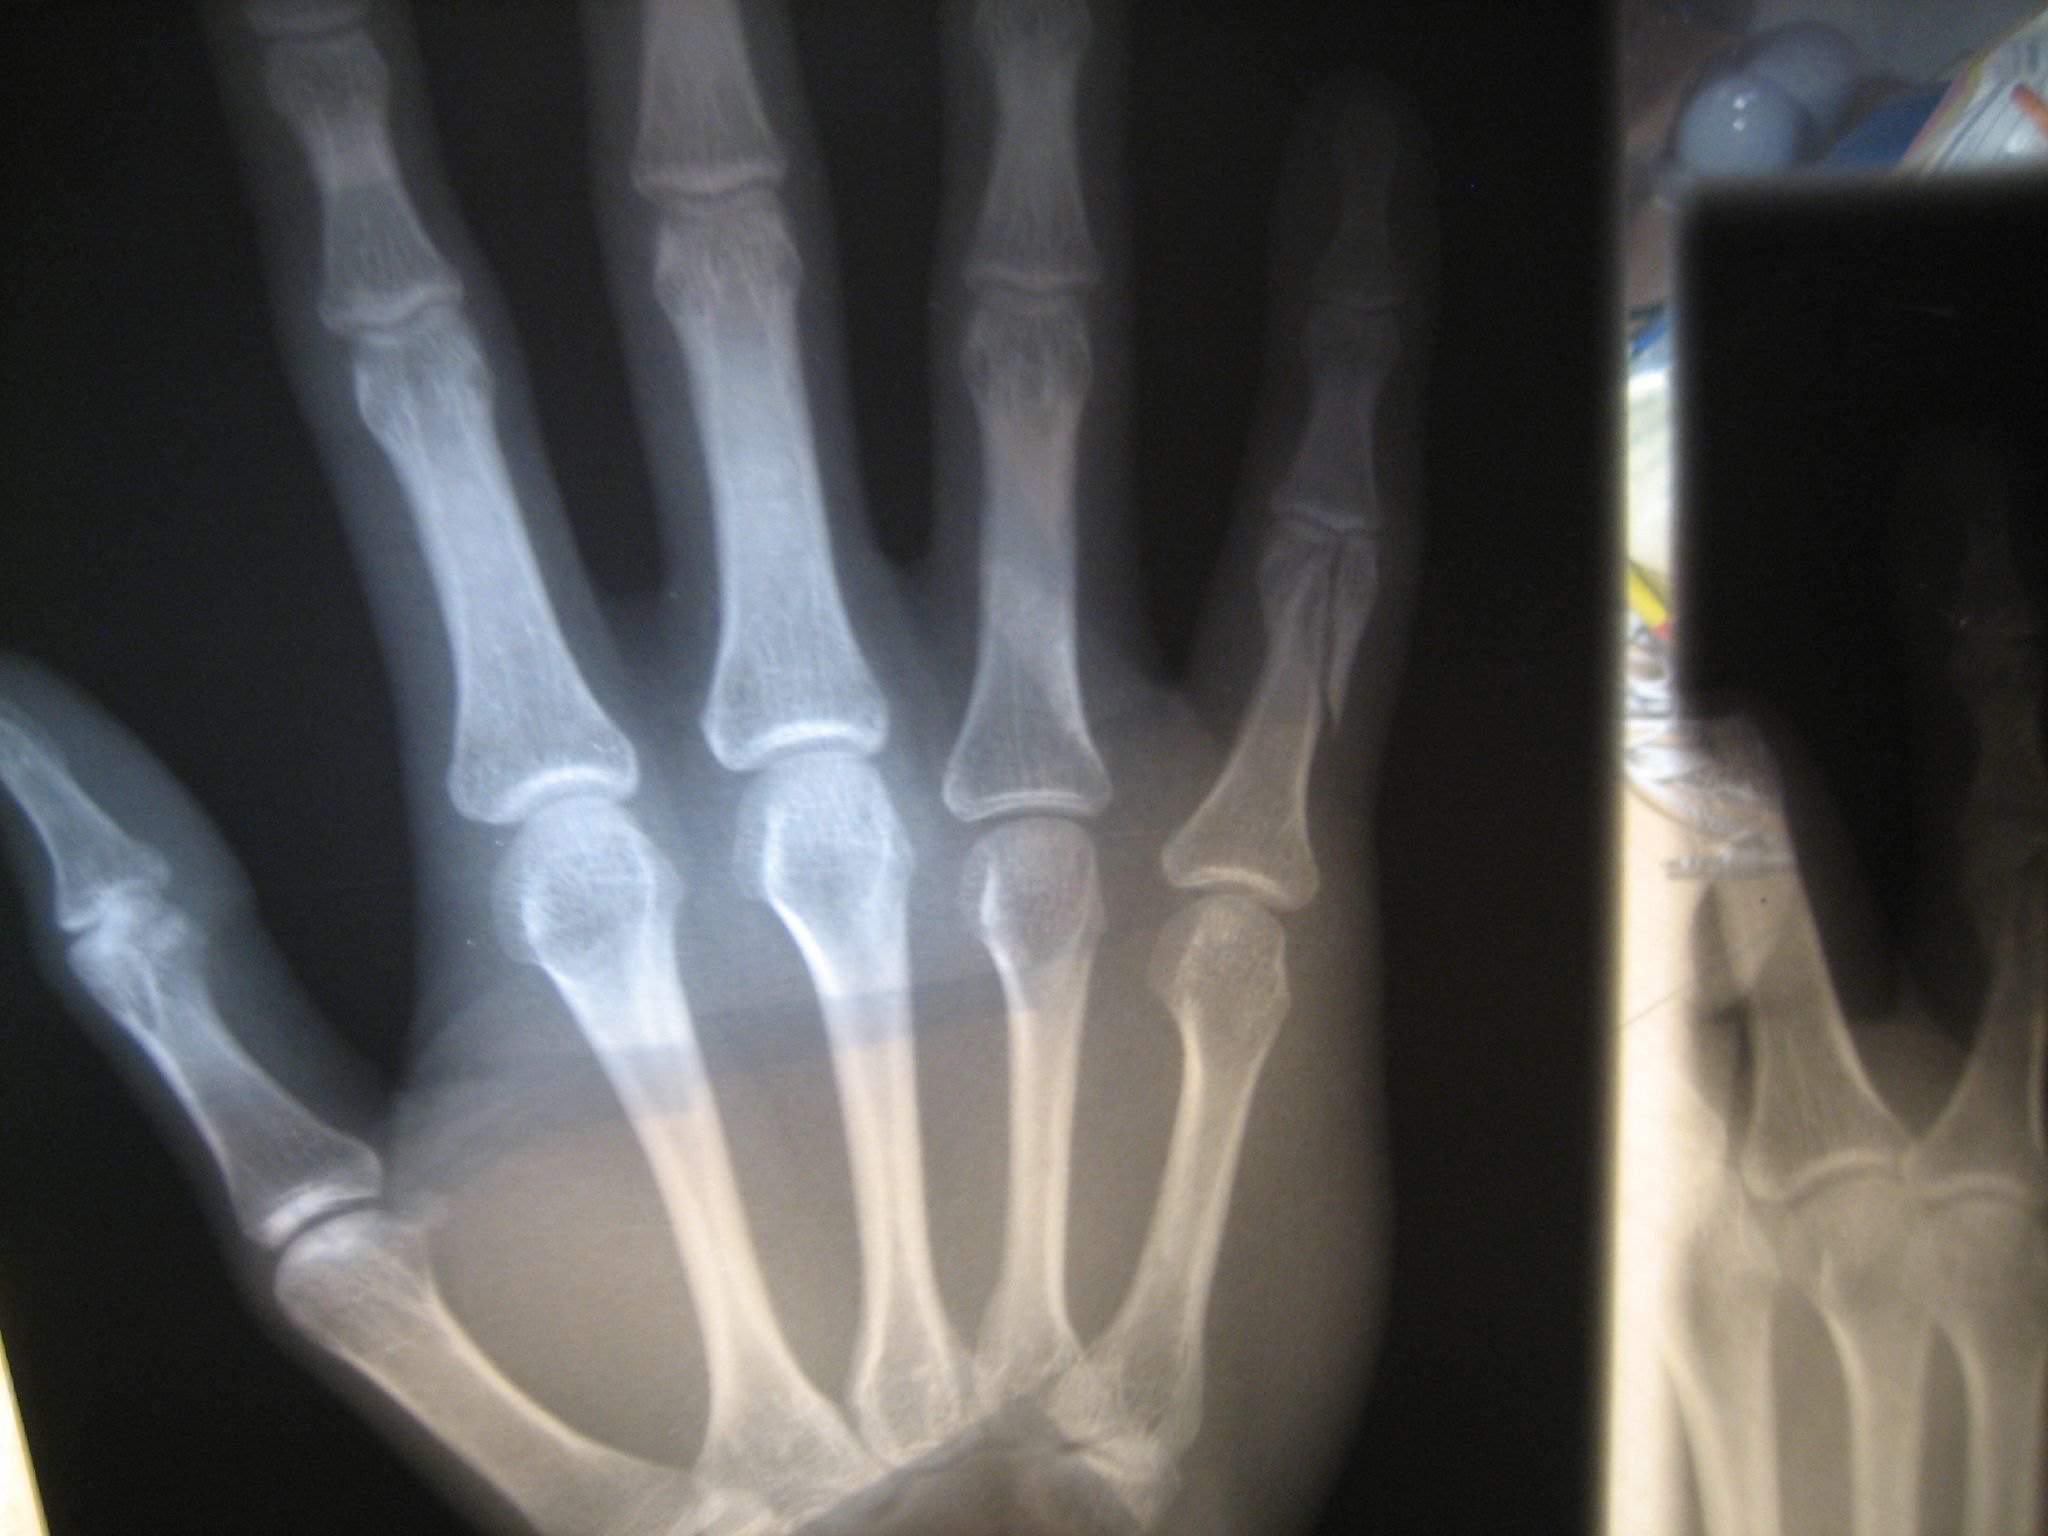 How Can I Tell if a Hospital or Doctor Misdiagnosed a Fracture? Thistle Law Firm